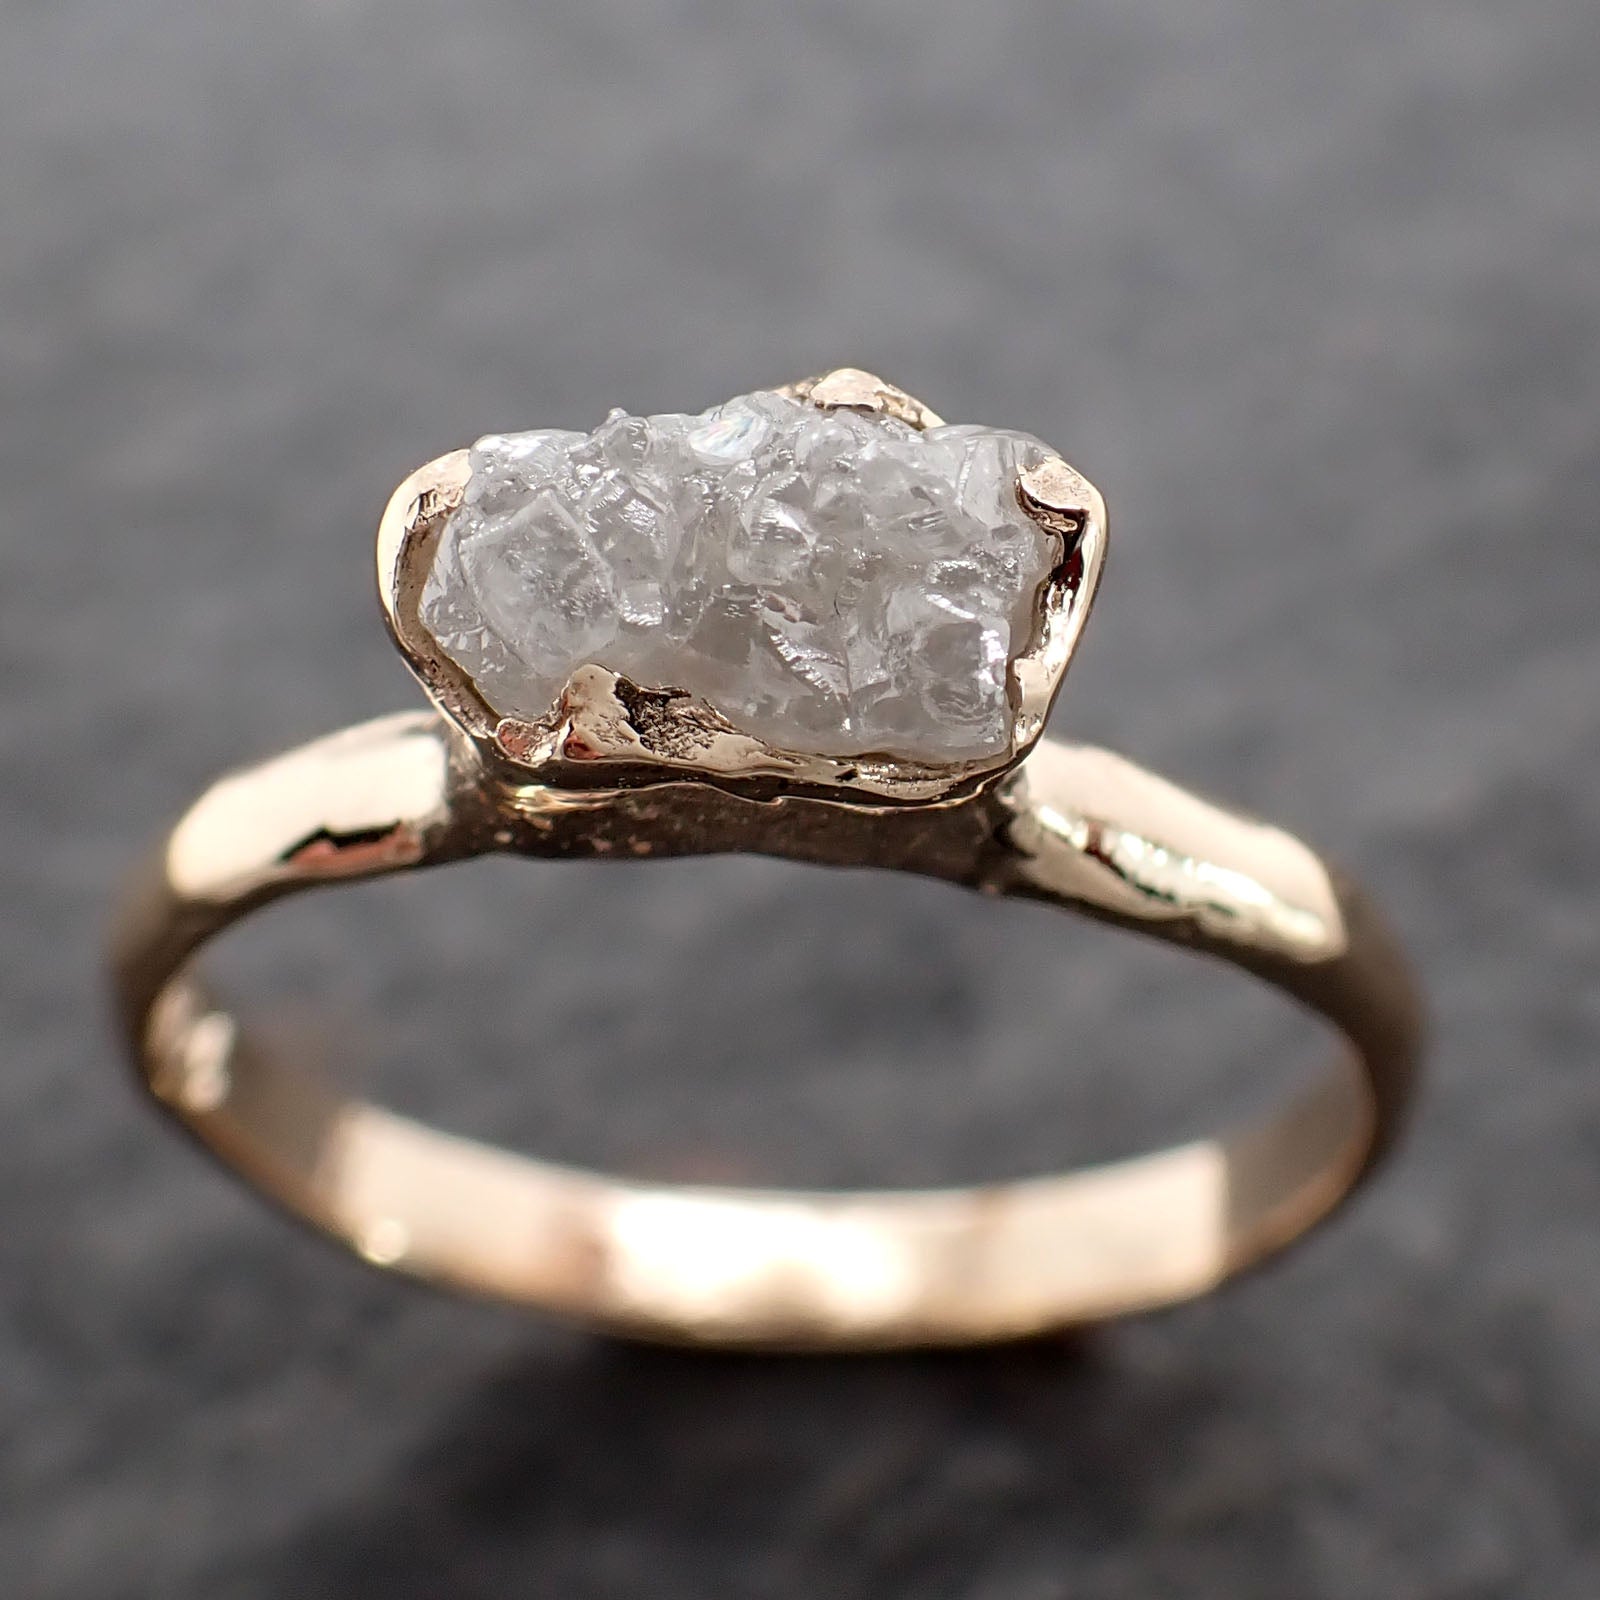 raw diamond engagement ring rough uncut diamond solitaire recycled 14k yellow gold conflict free diamond wedding promise 2693 Alternative Engagement